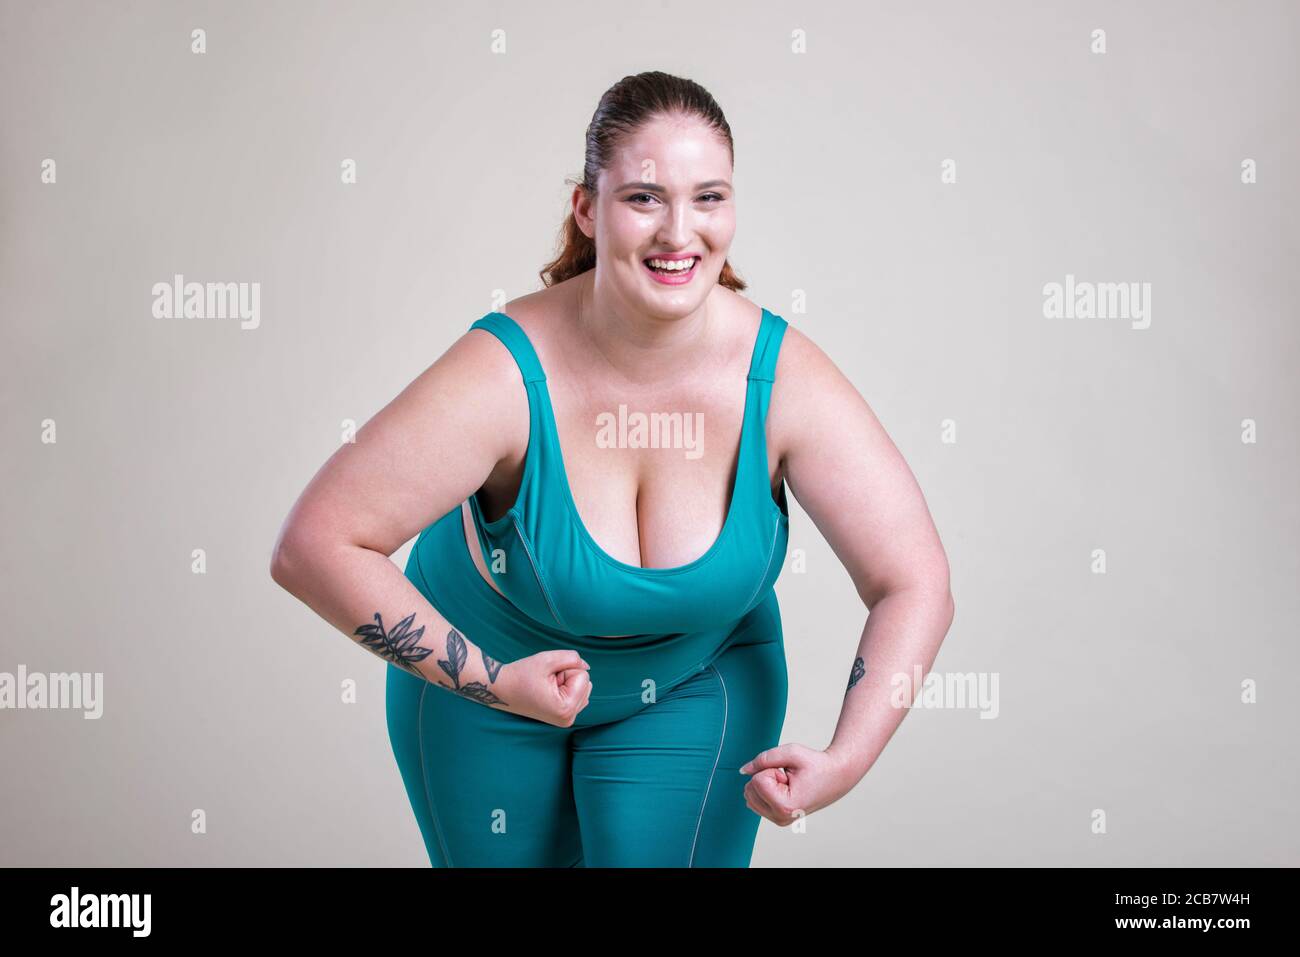 Plus size woman making sport and fitness. Studio portraits with